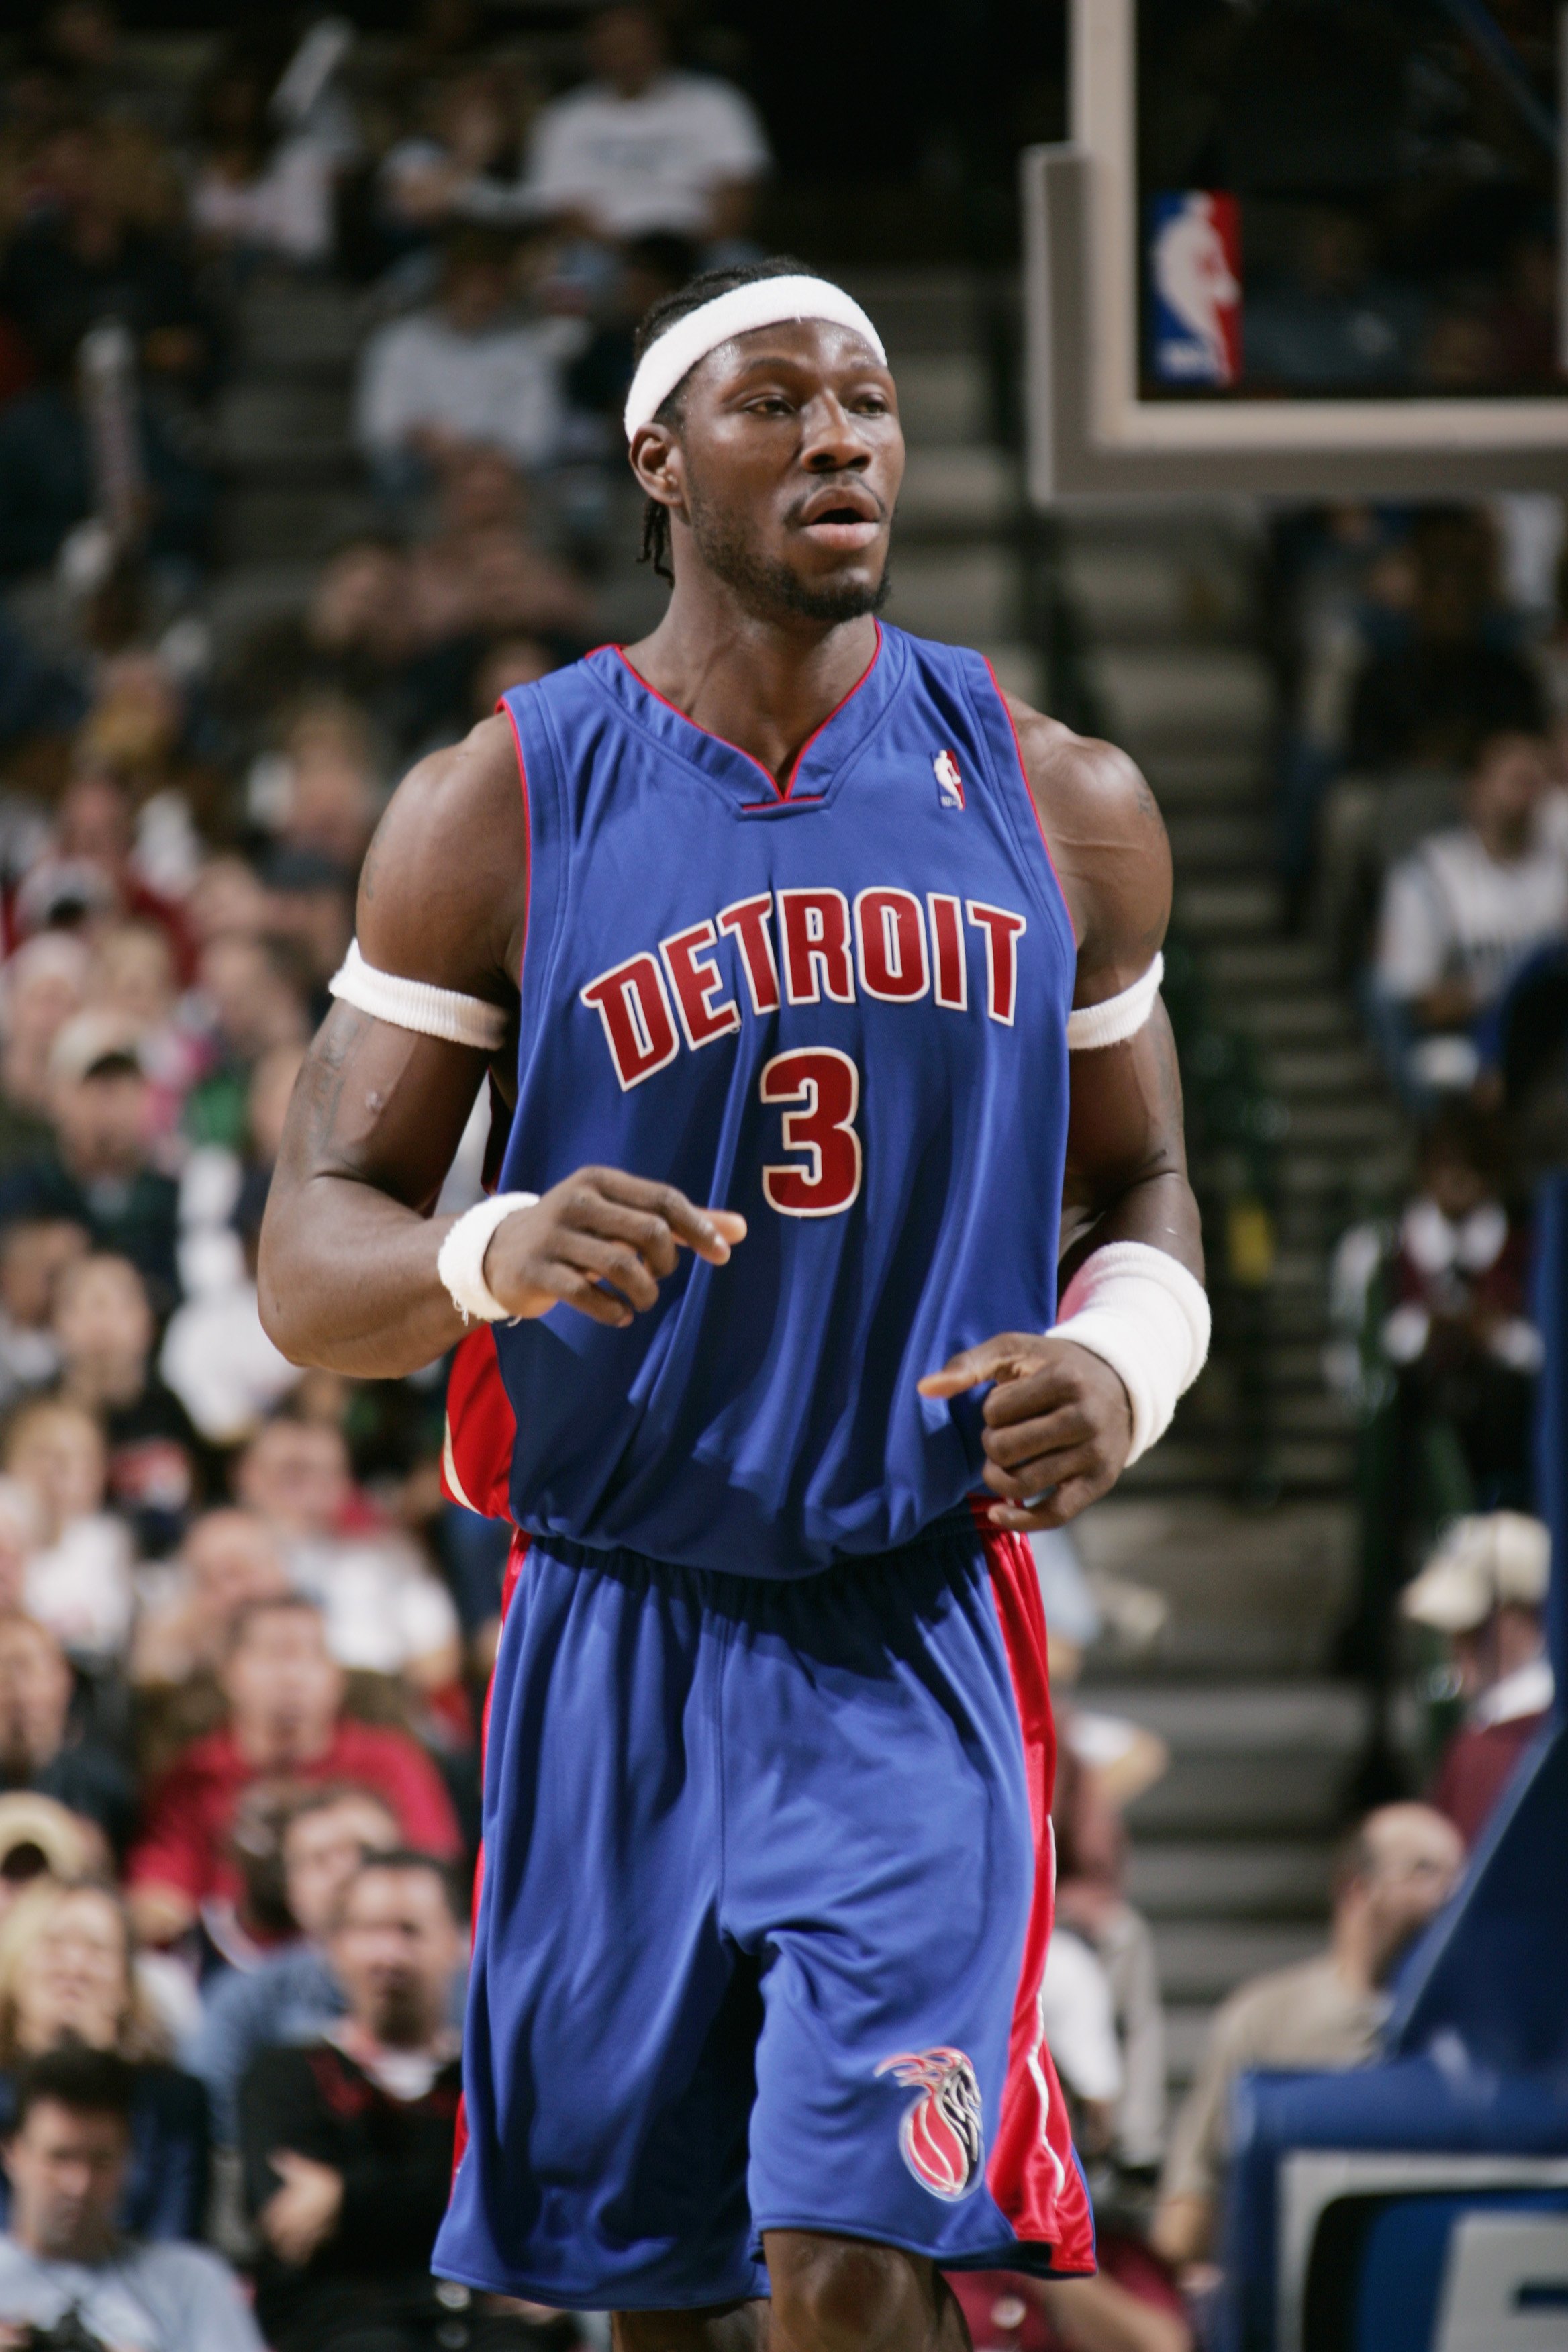  Ben Wallace #3 of the Detroit Pistons stands on the court during the game against the Dallas Mavericks on December 6, 2004 | Photo: GettyImages